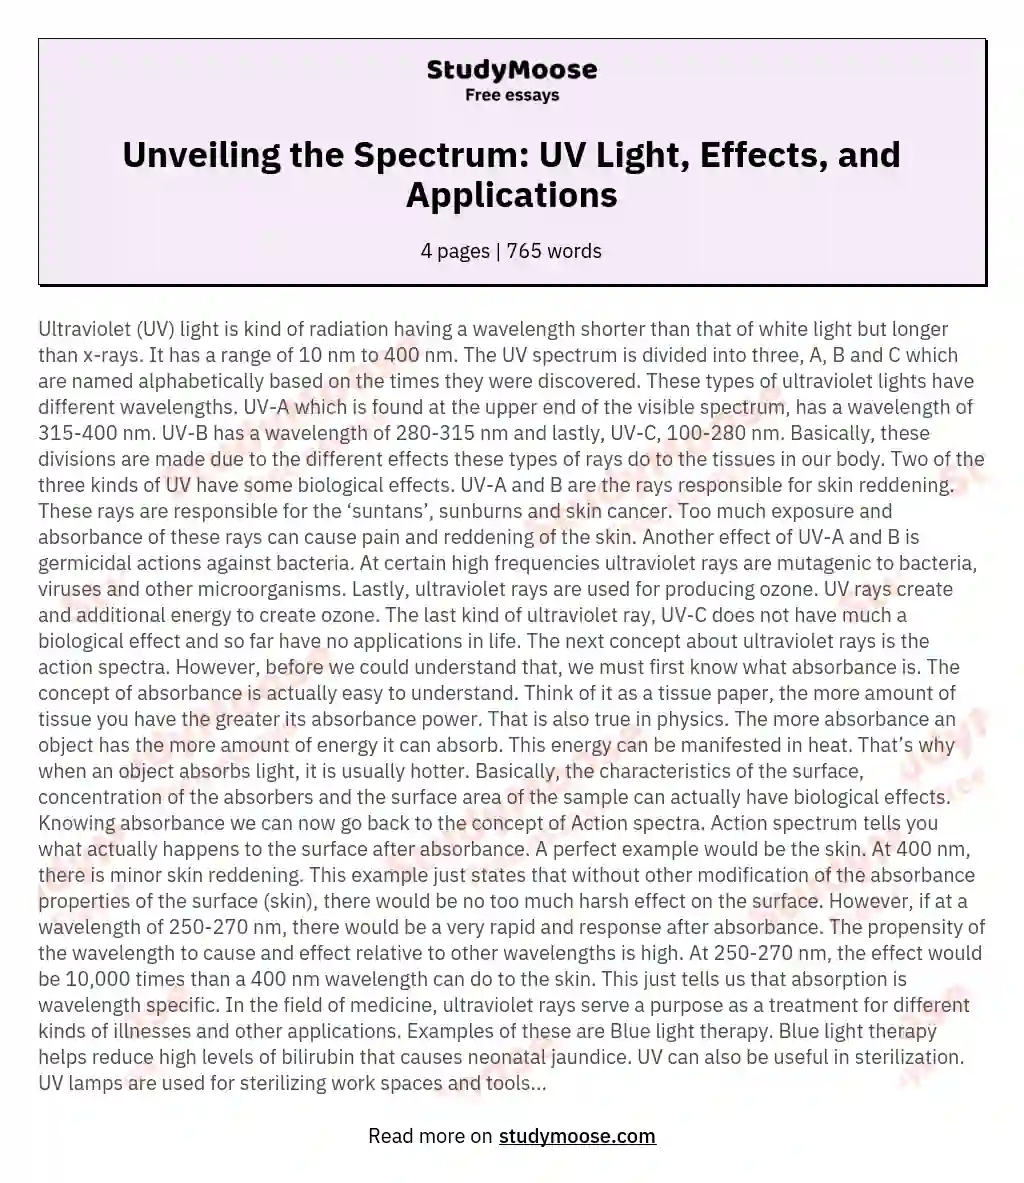 Unveiling the Spectrum: UV Light, Effects, and Applications essay